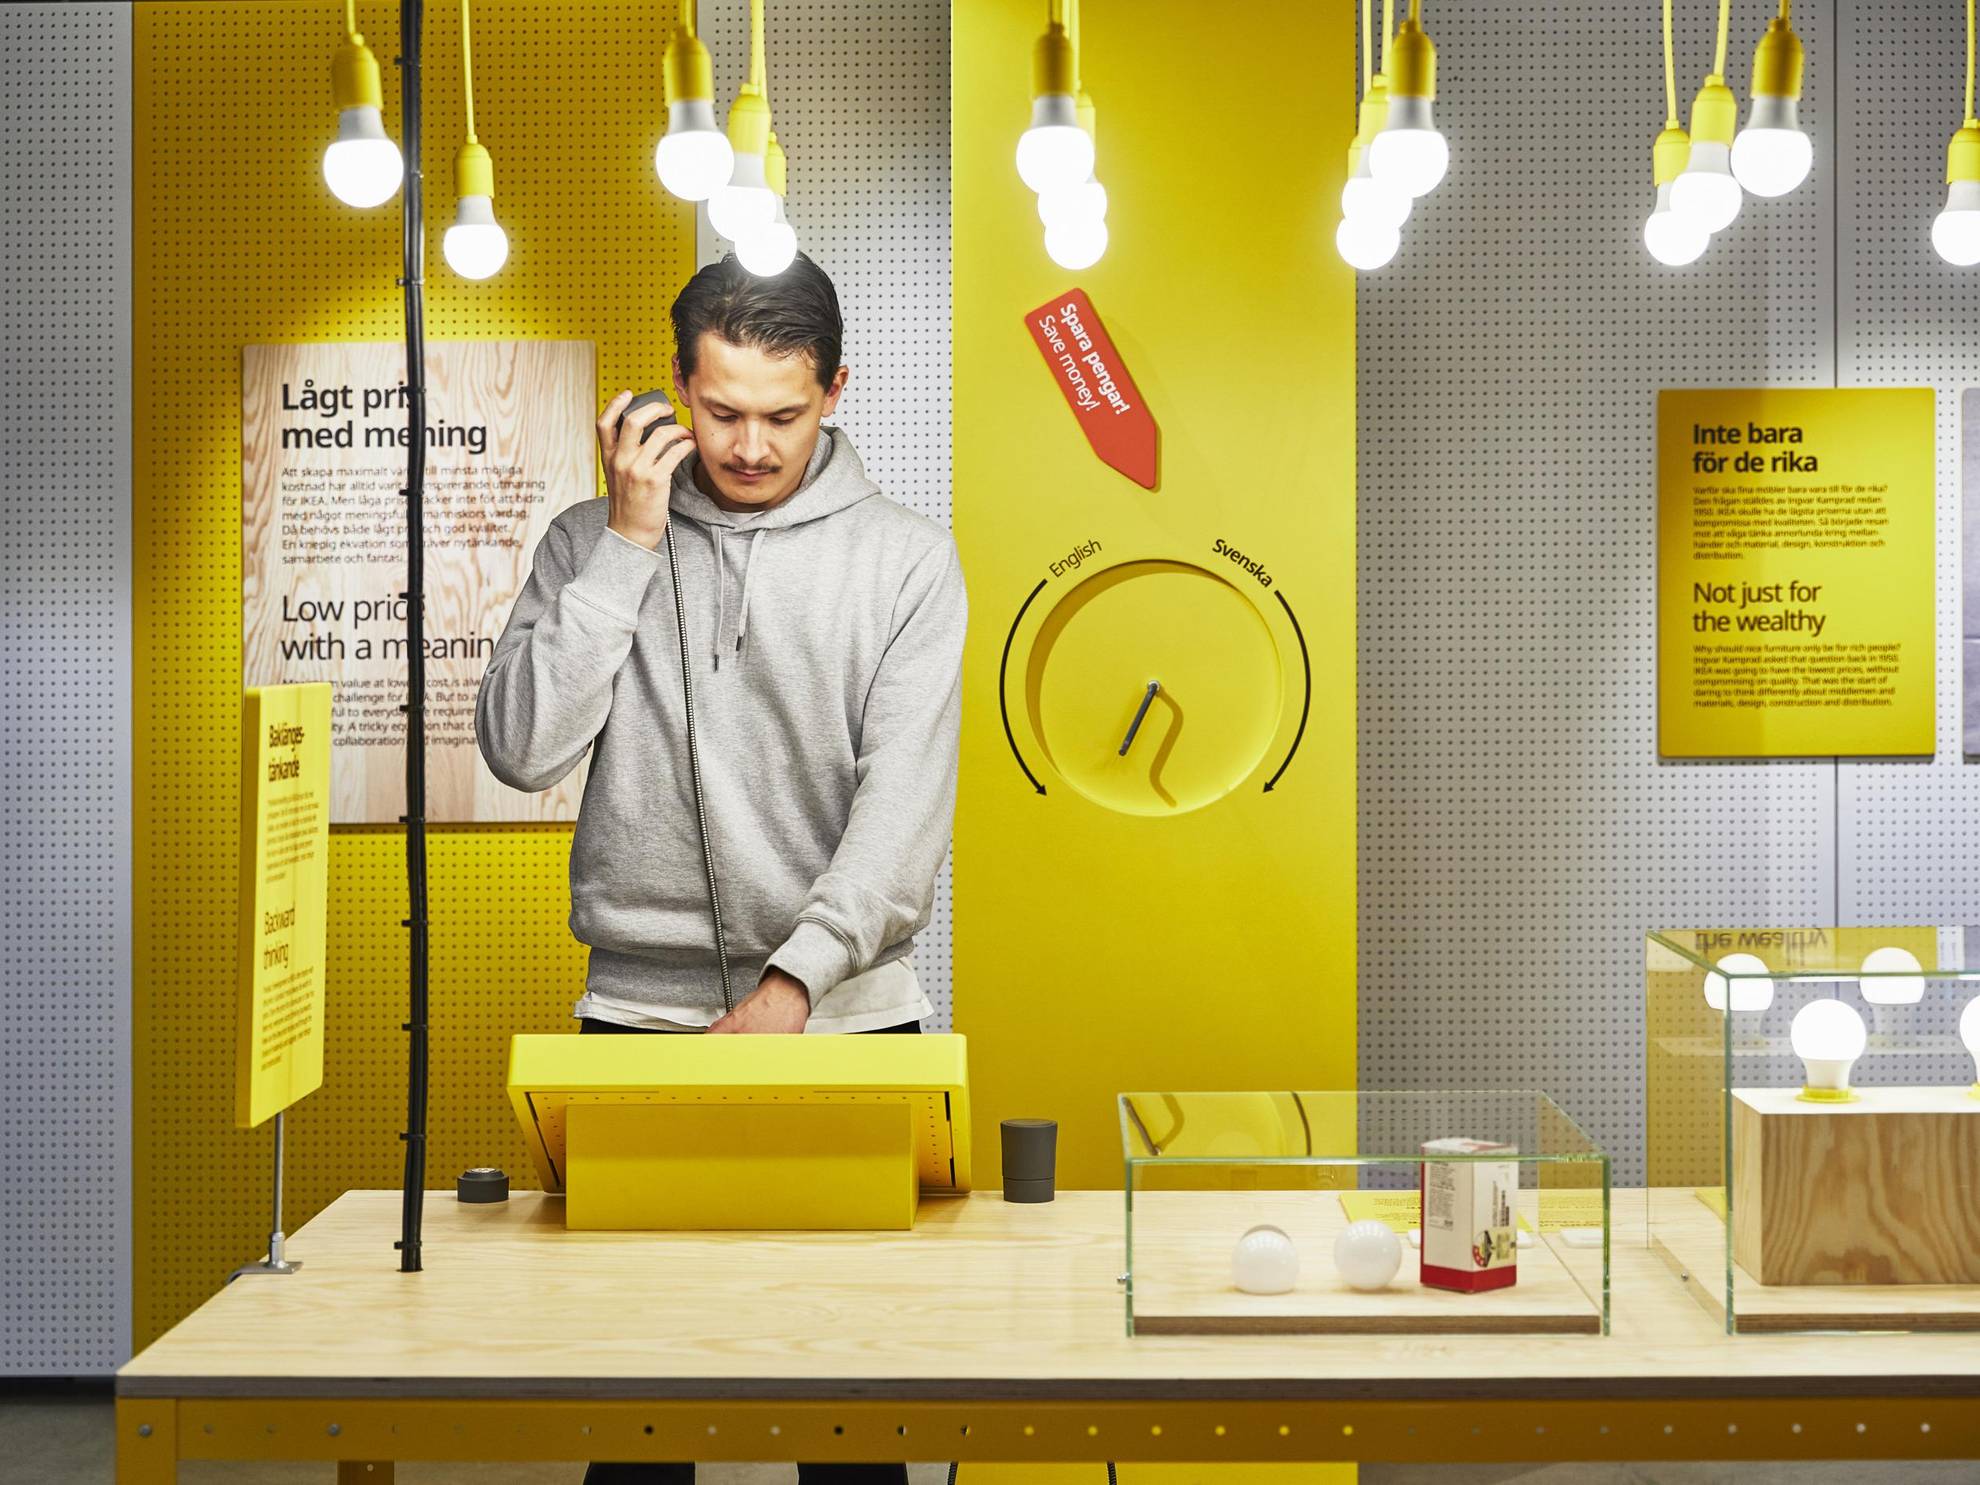 A man is standing by a table looking at a yellow display in one of Ikea's exhibitions. There are light bulbs hanging from the ceiling and glass boxes with light bulbs in them on the table.